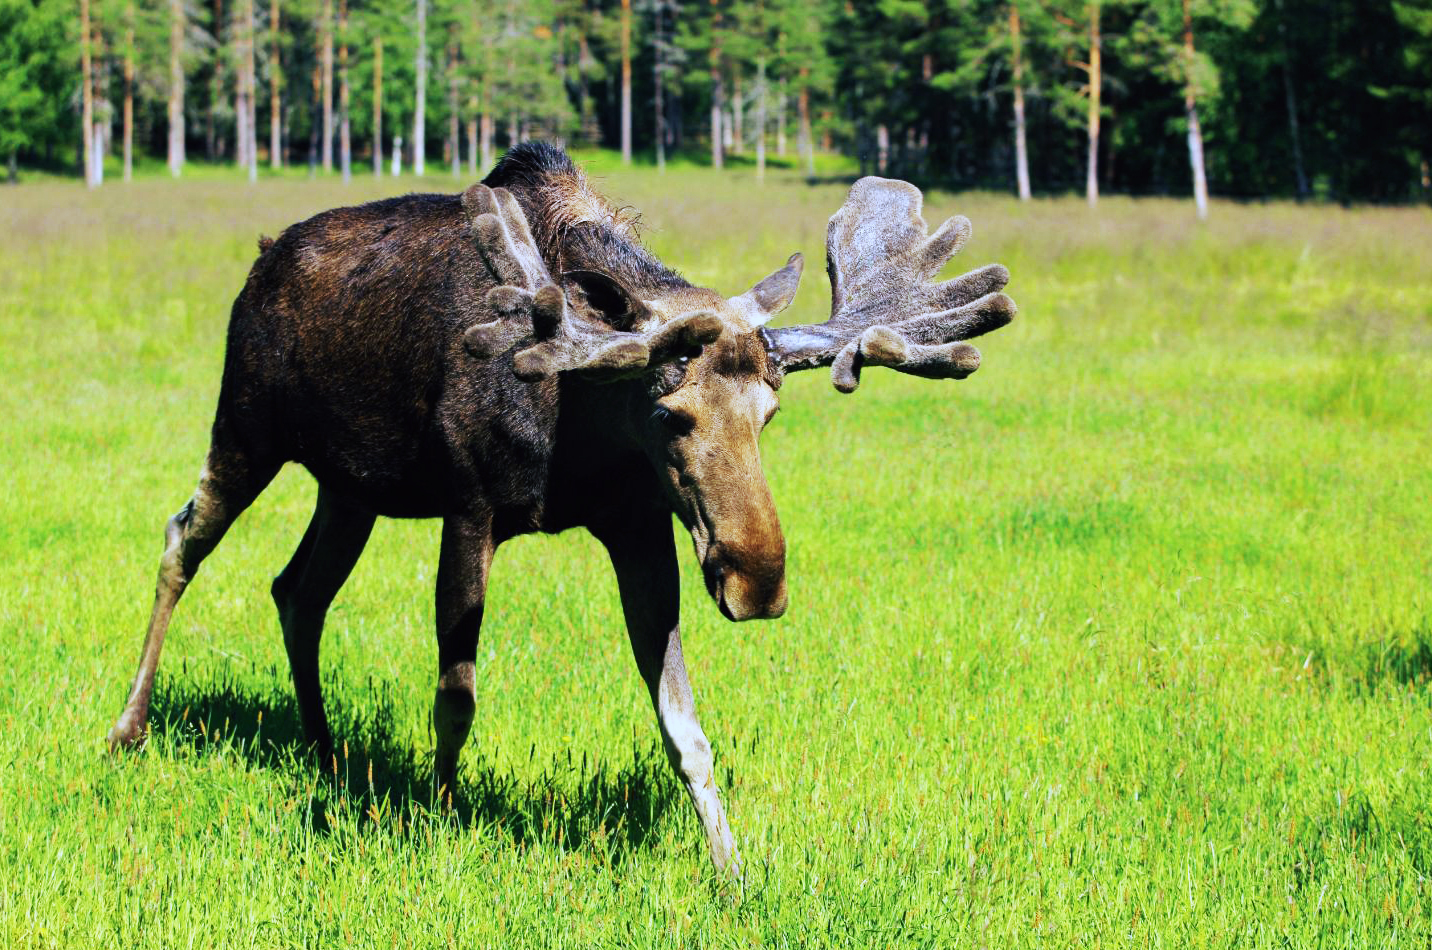 Photo of a Moose from VisitFinland.com.